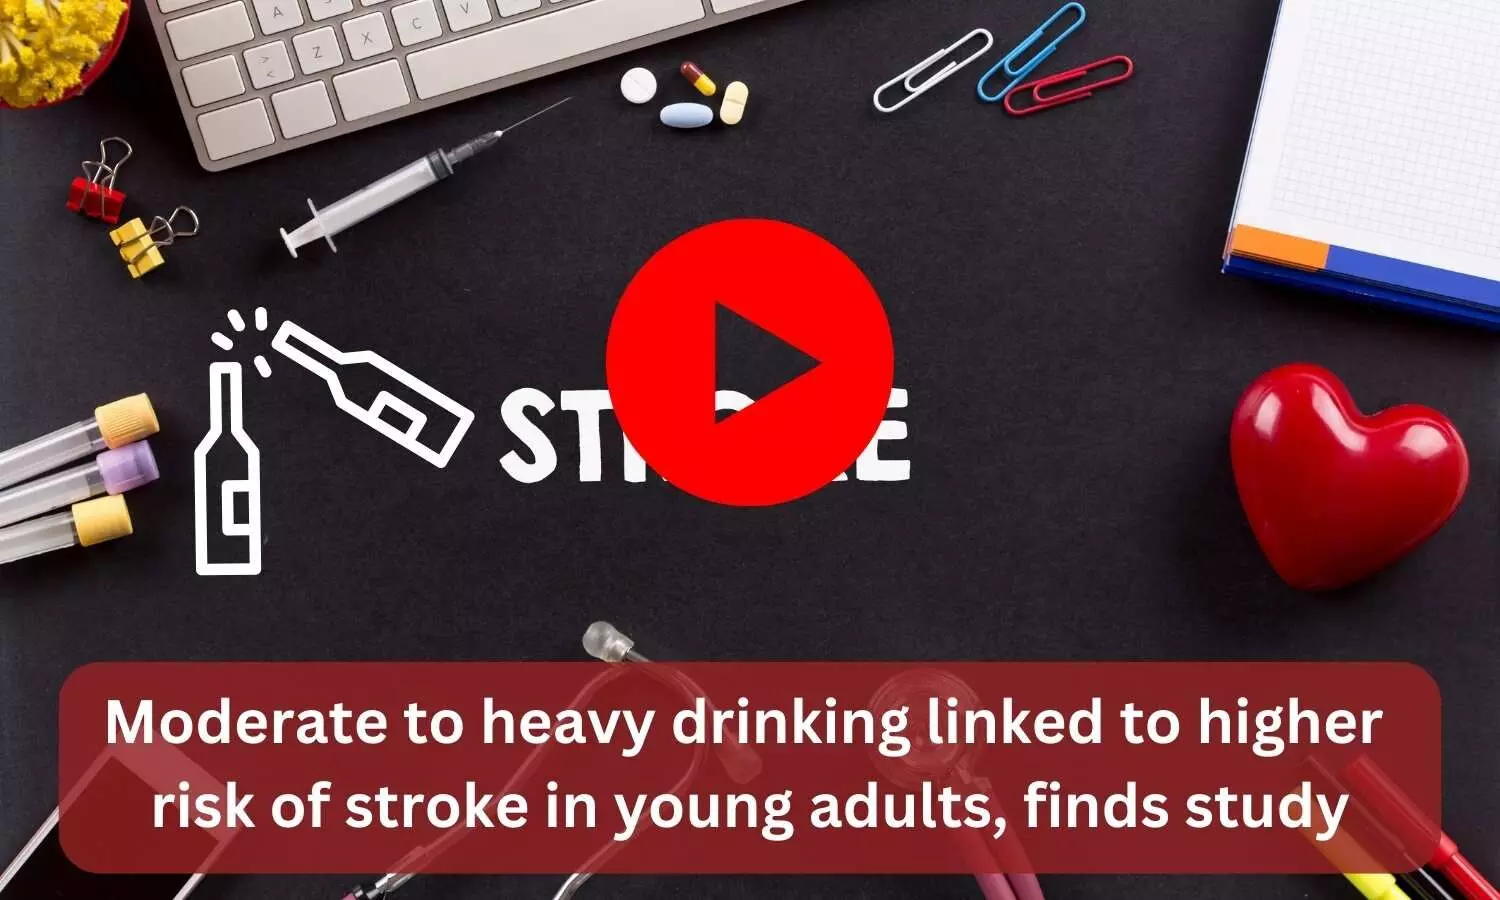 Moderate to heavy drinking linked to higher risk of stroke in young adults, finds study